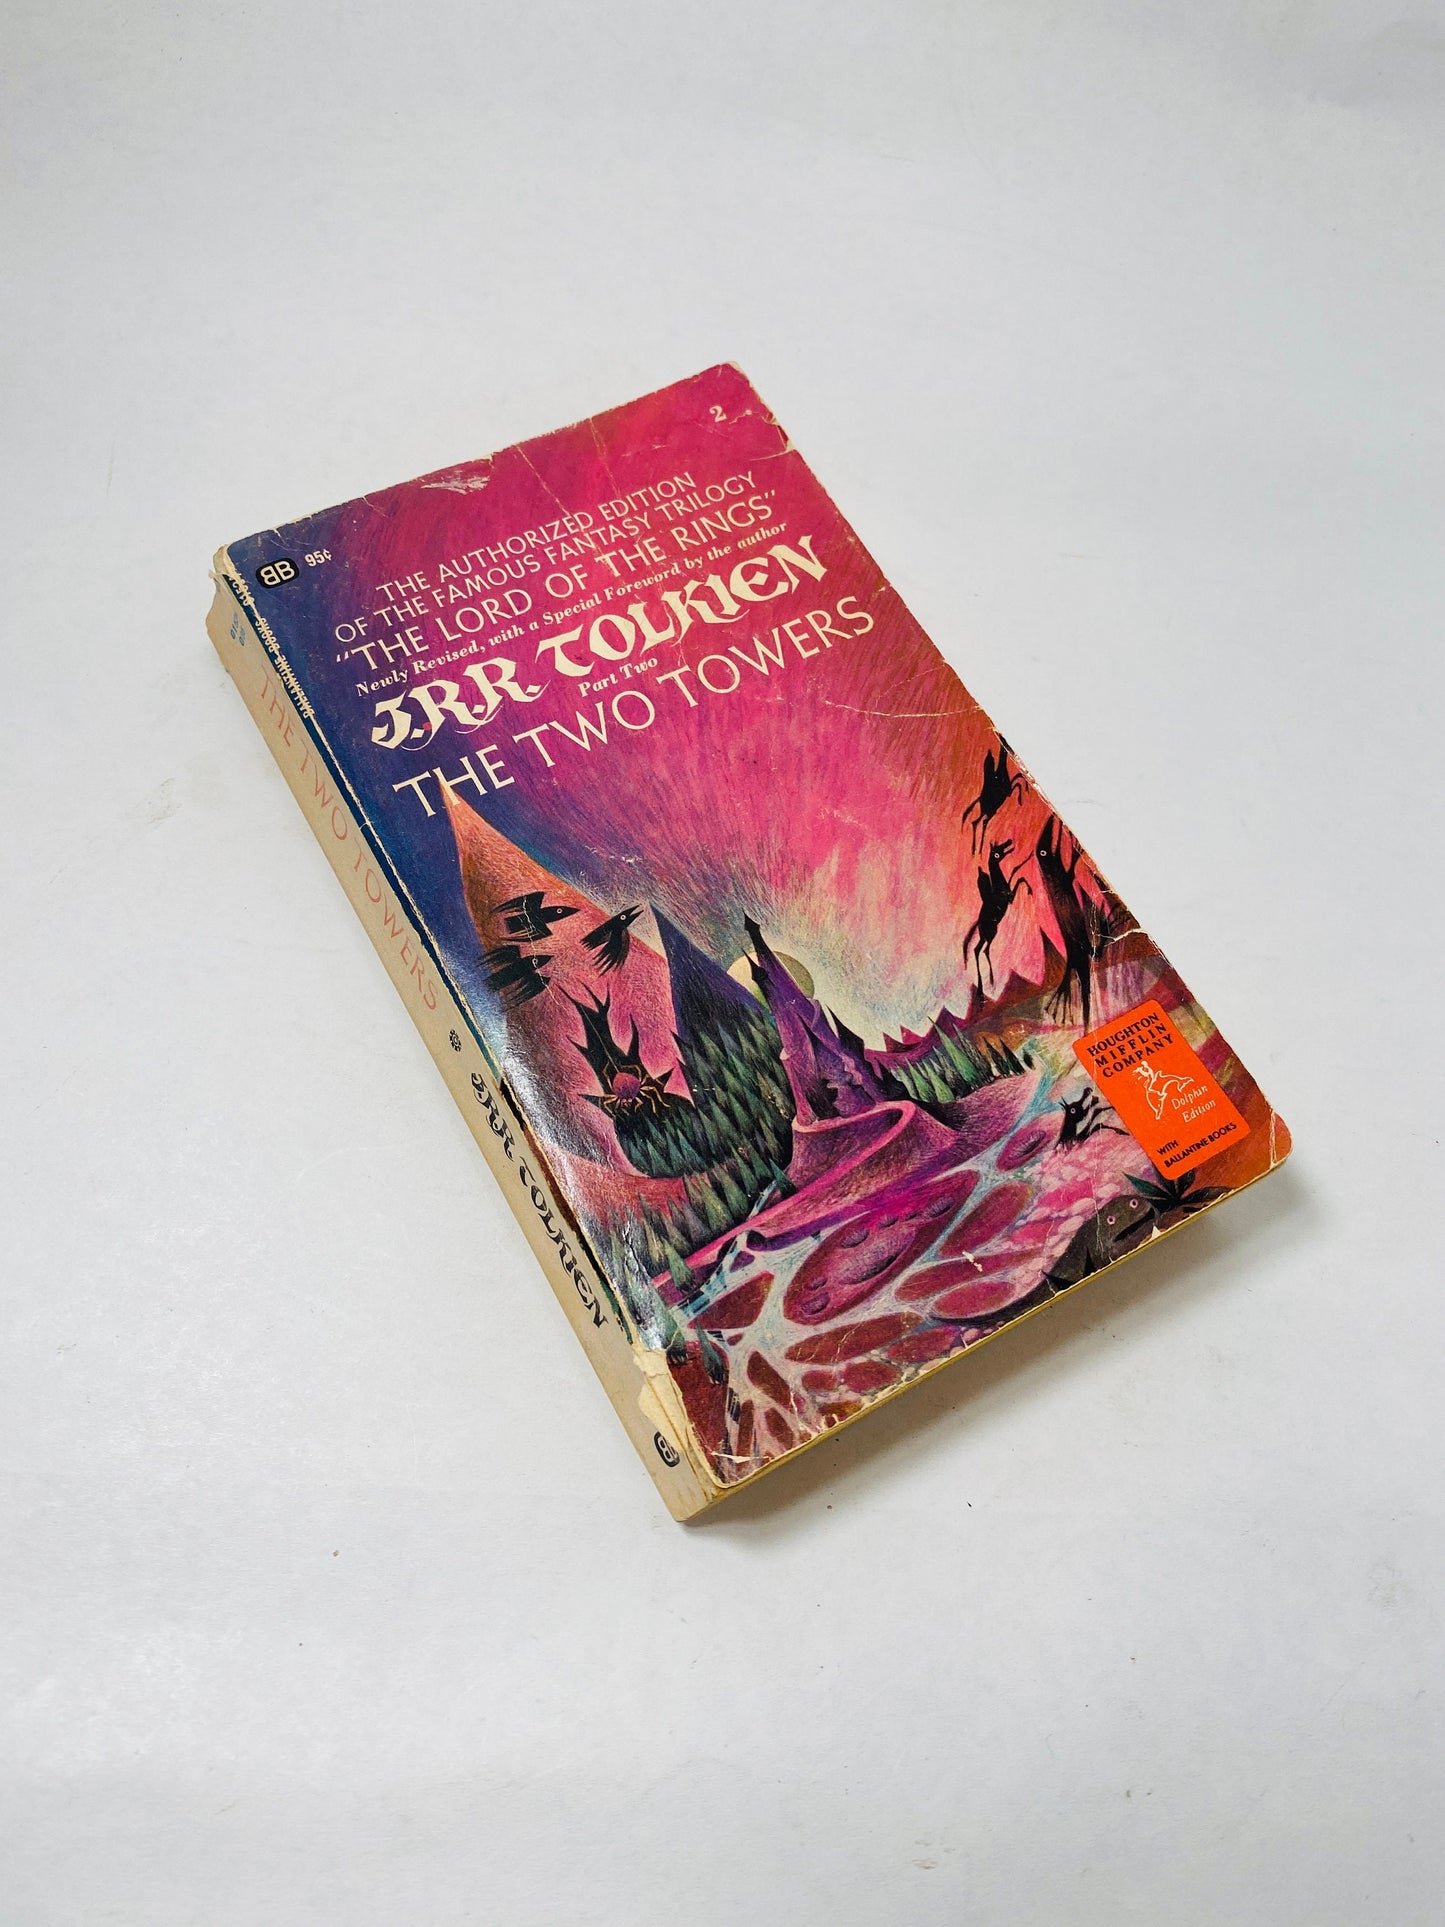 1967 Two Towers paperback book by JRR Tolkien Lord of the Rings Hobbit prelude Ballantine Books